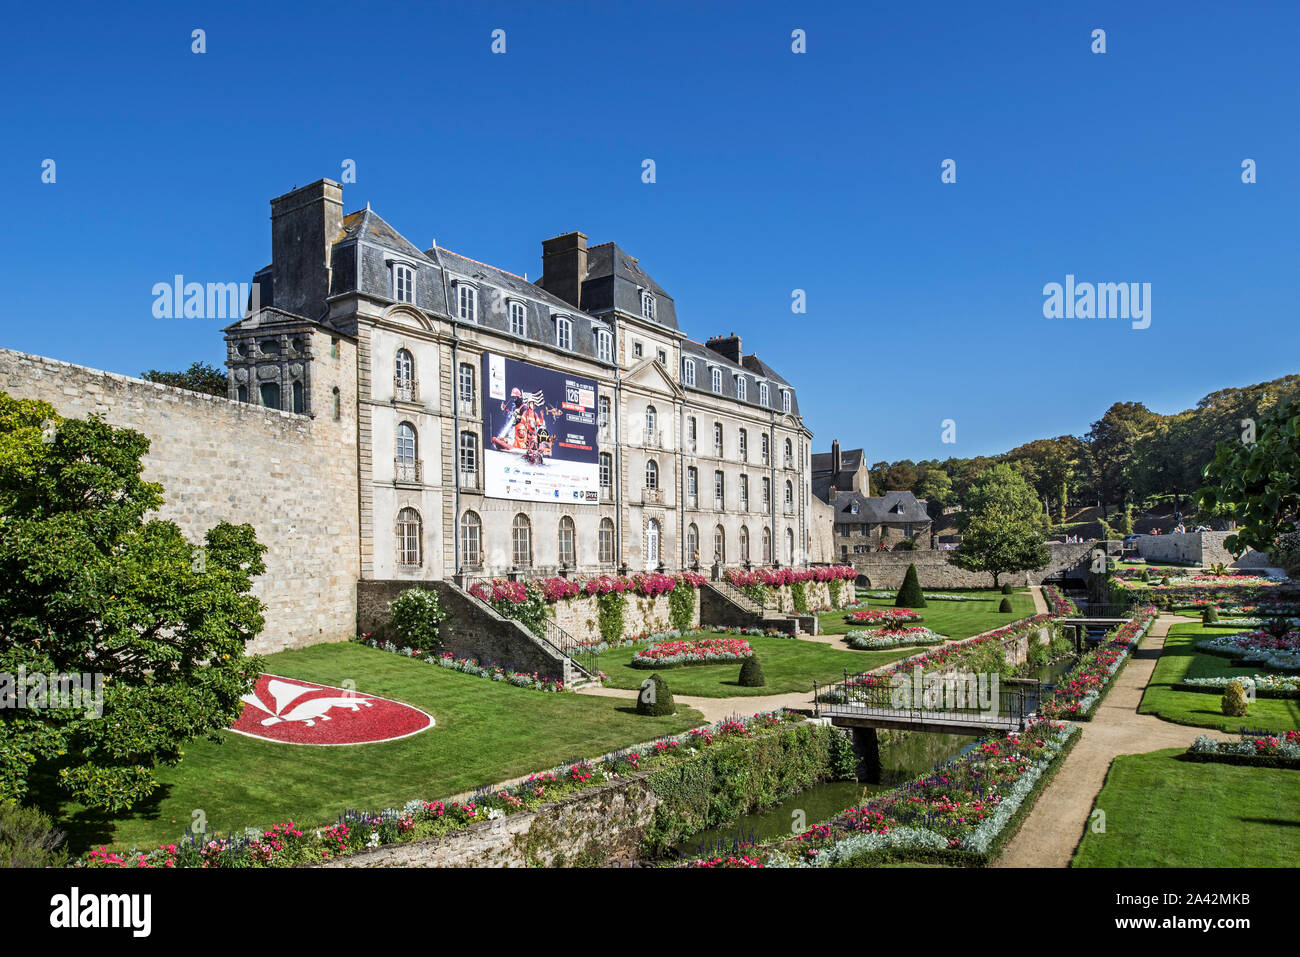 Château de l'Hermine, 1785 castle and garden in the city Vannes, Morbihan, Brittany, France Stock Photo